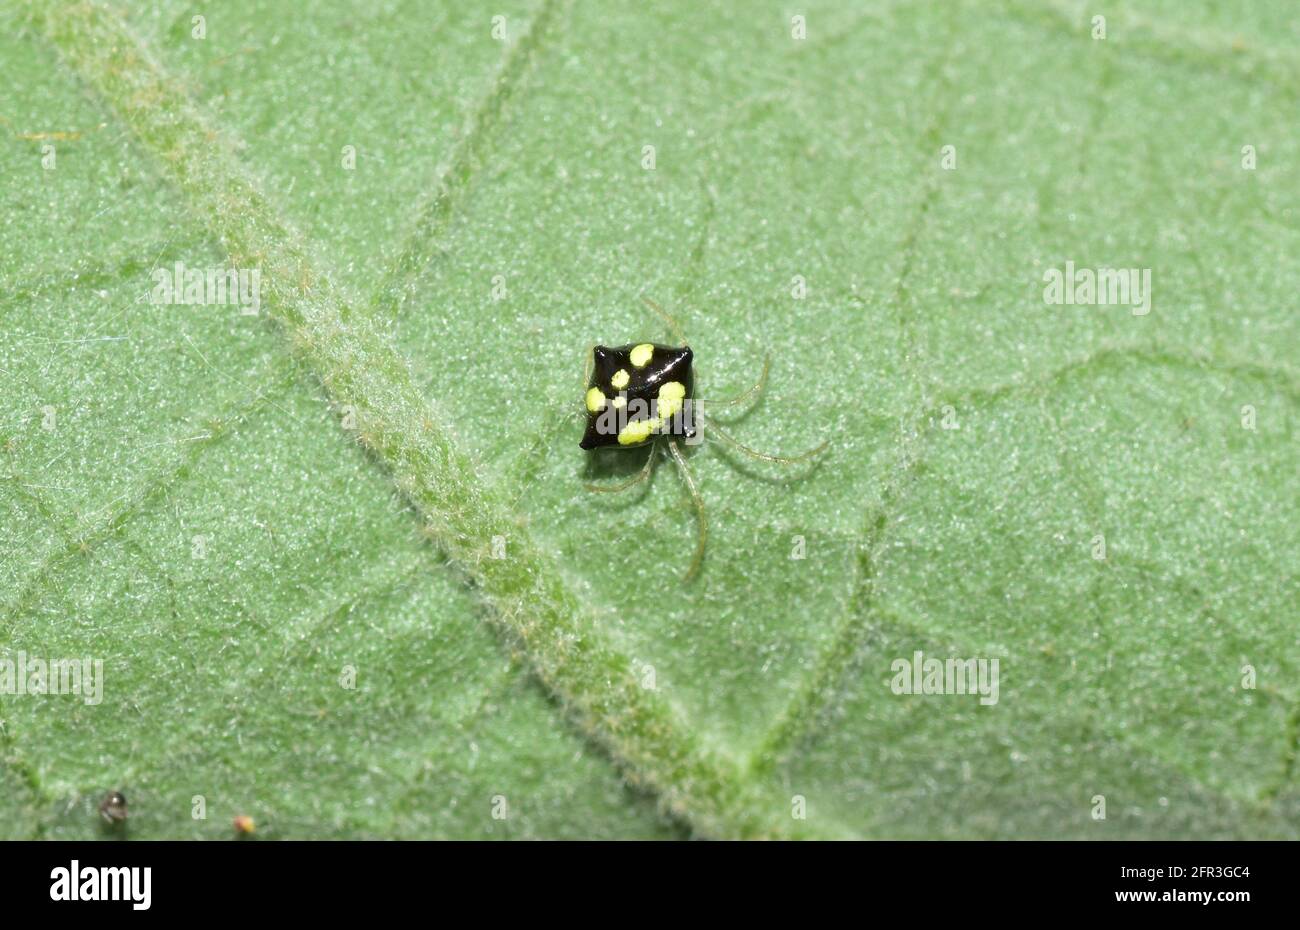 A cobweb spider, scientifically known as Theridula gonygaster, on the leaf of an eggplant trees. Stock Photo